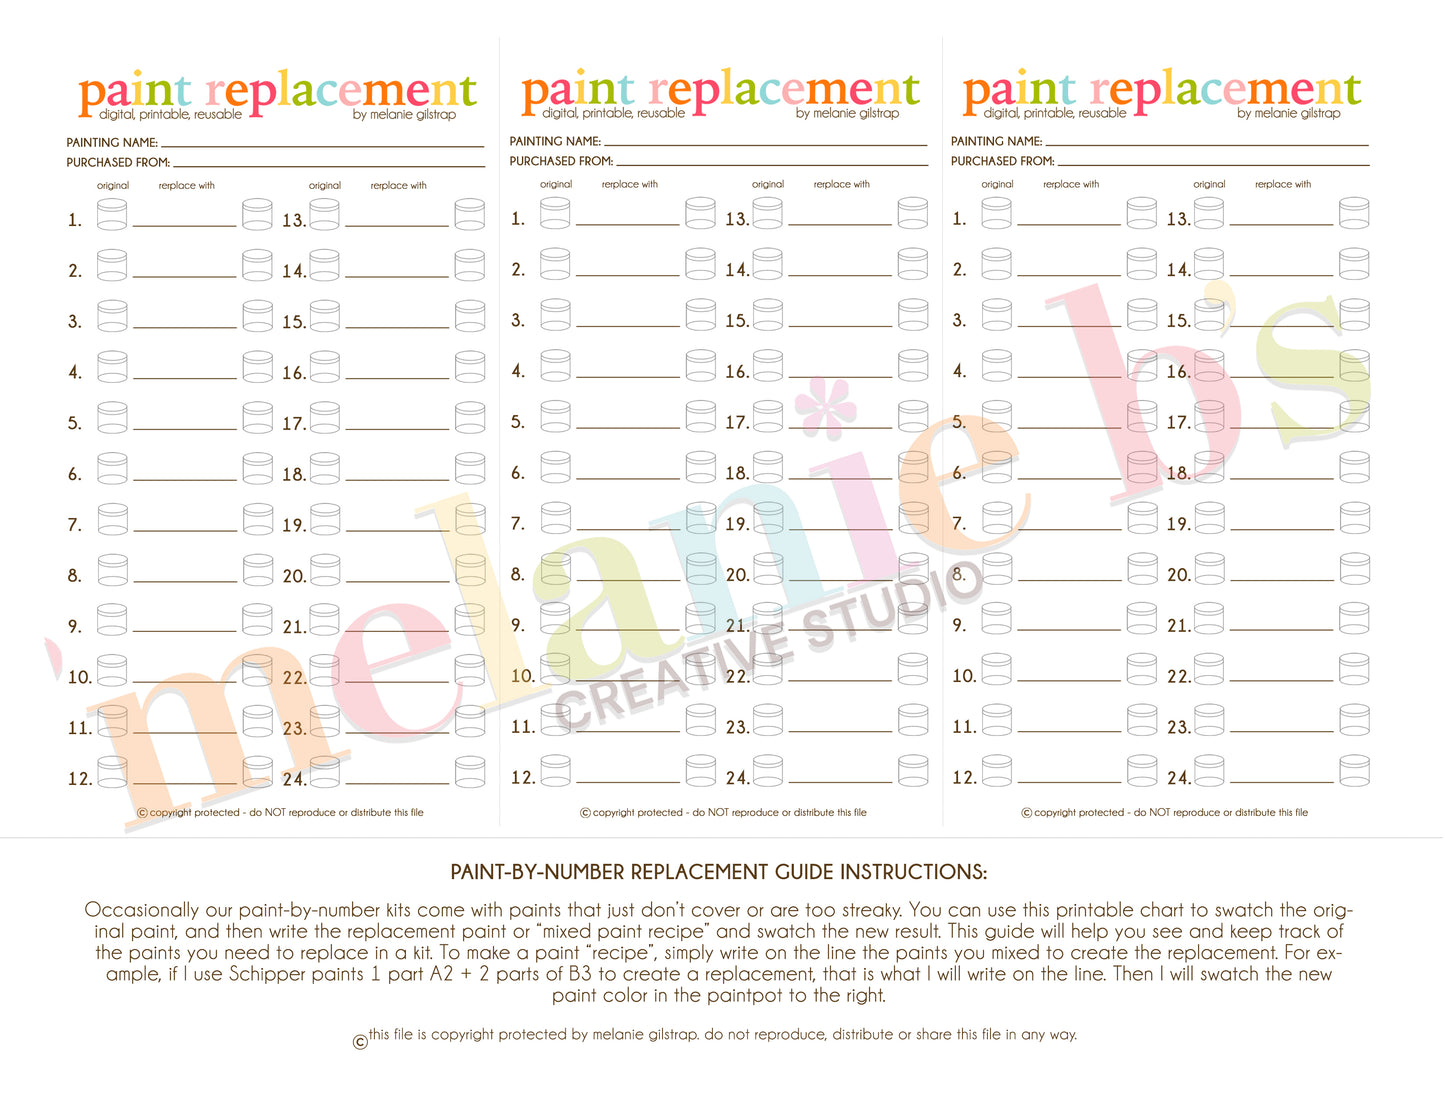 MB's Digital Downloadable & Printable Guide for PBN: PAINT REPLACEMENT SWATCH GUIDE